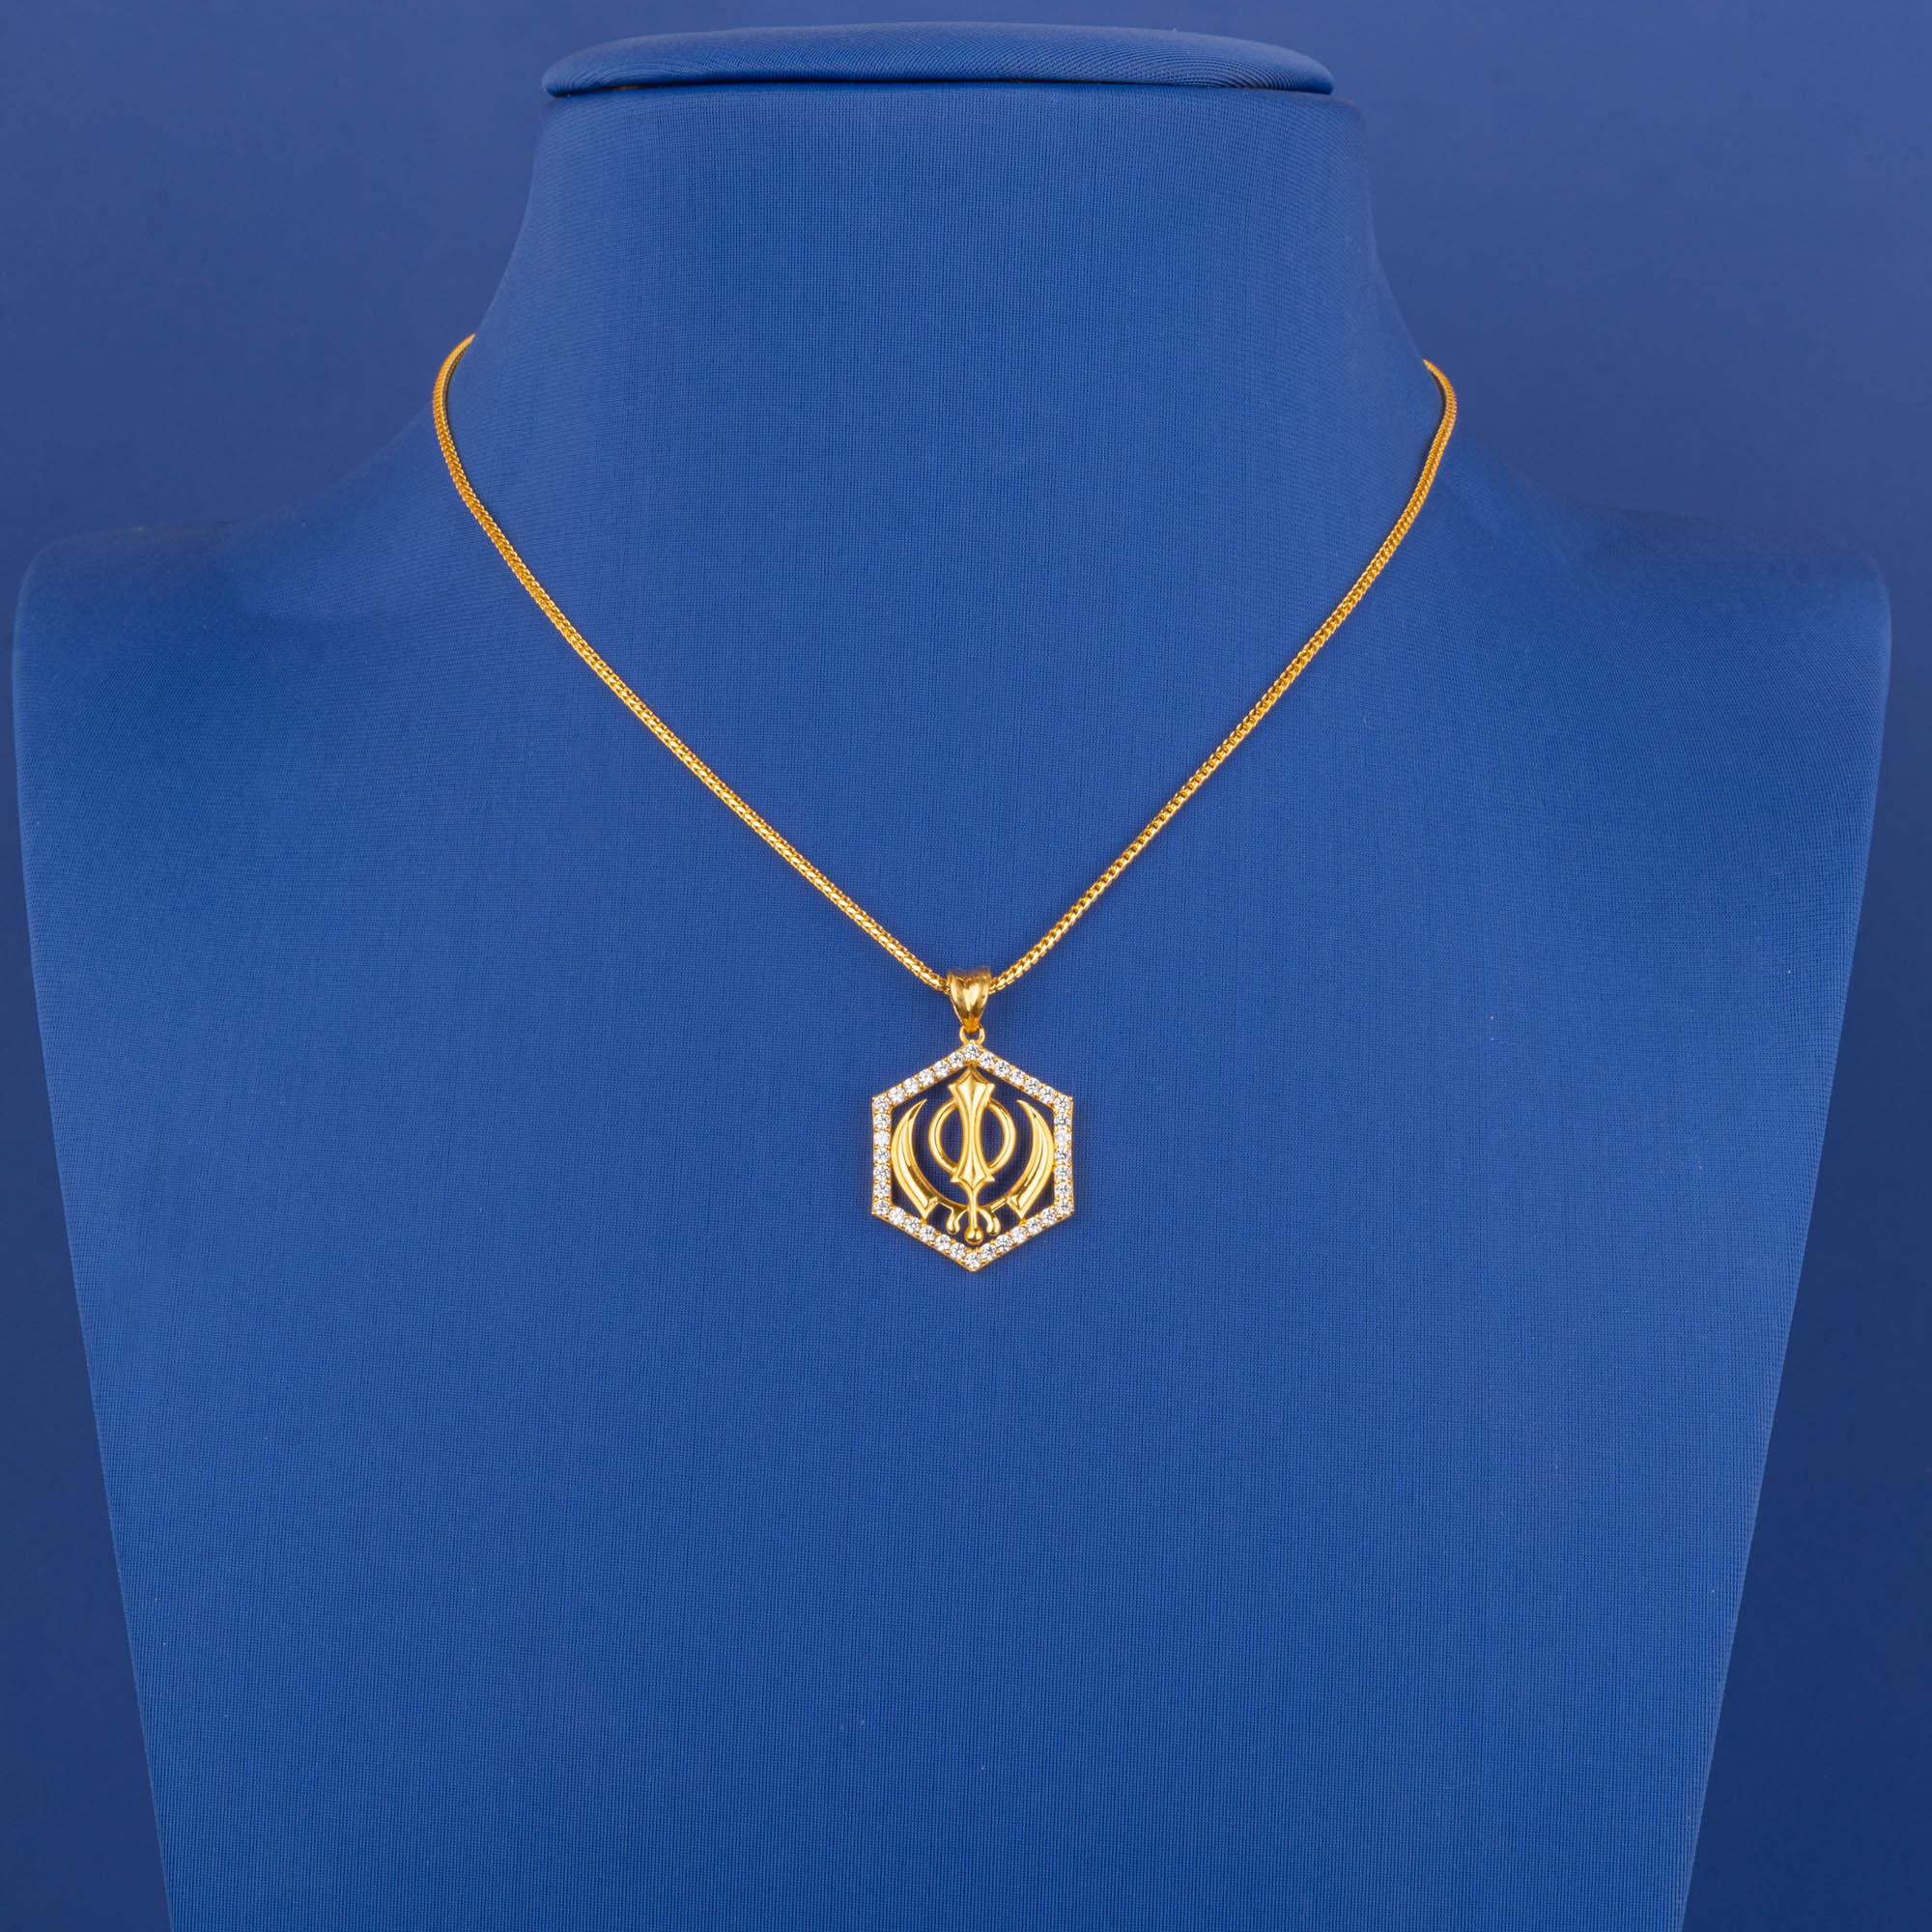 Sikh Khanda Luminary: Handcrafted 22K Yellow Gold Pendant (chain not included)